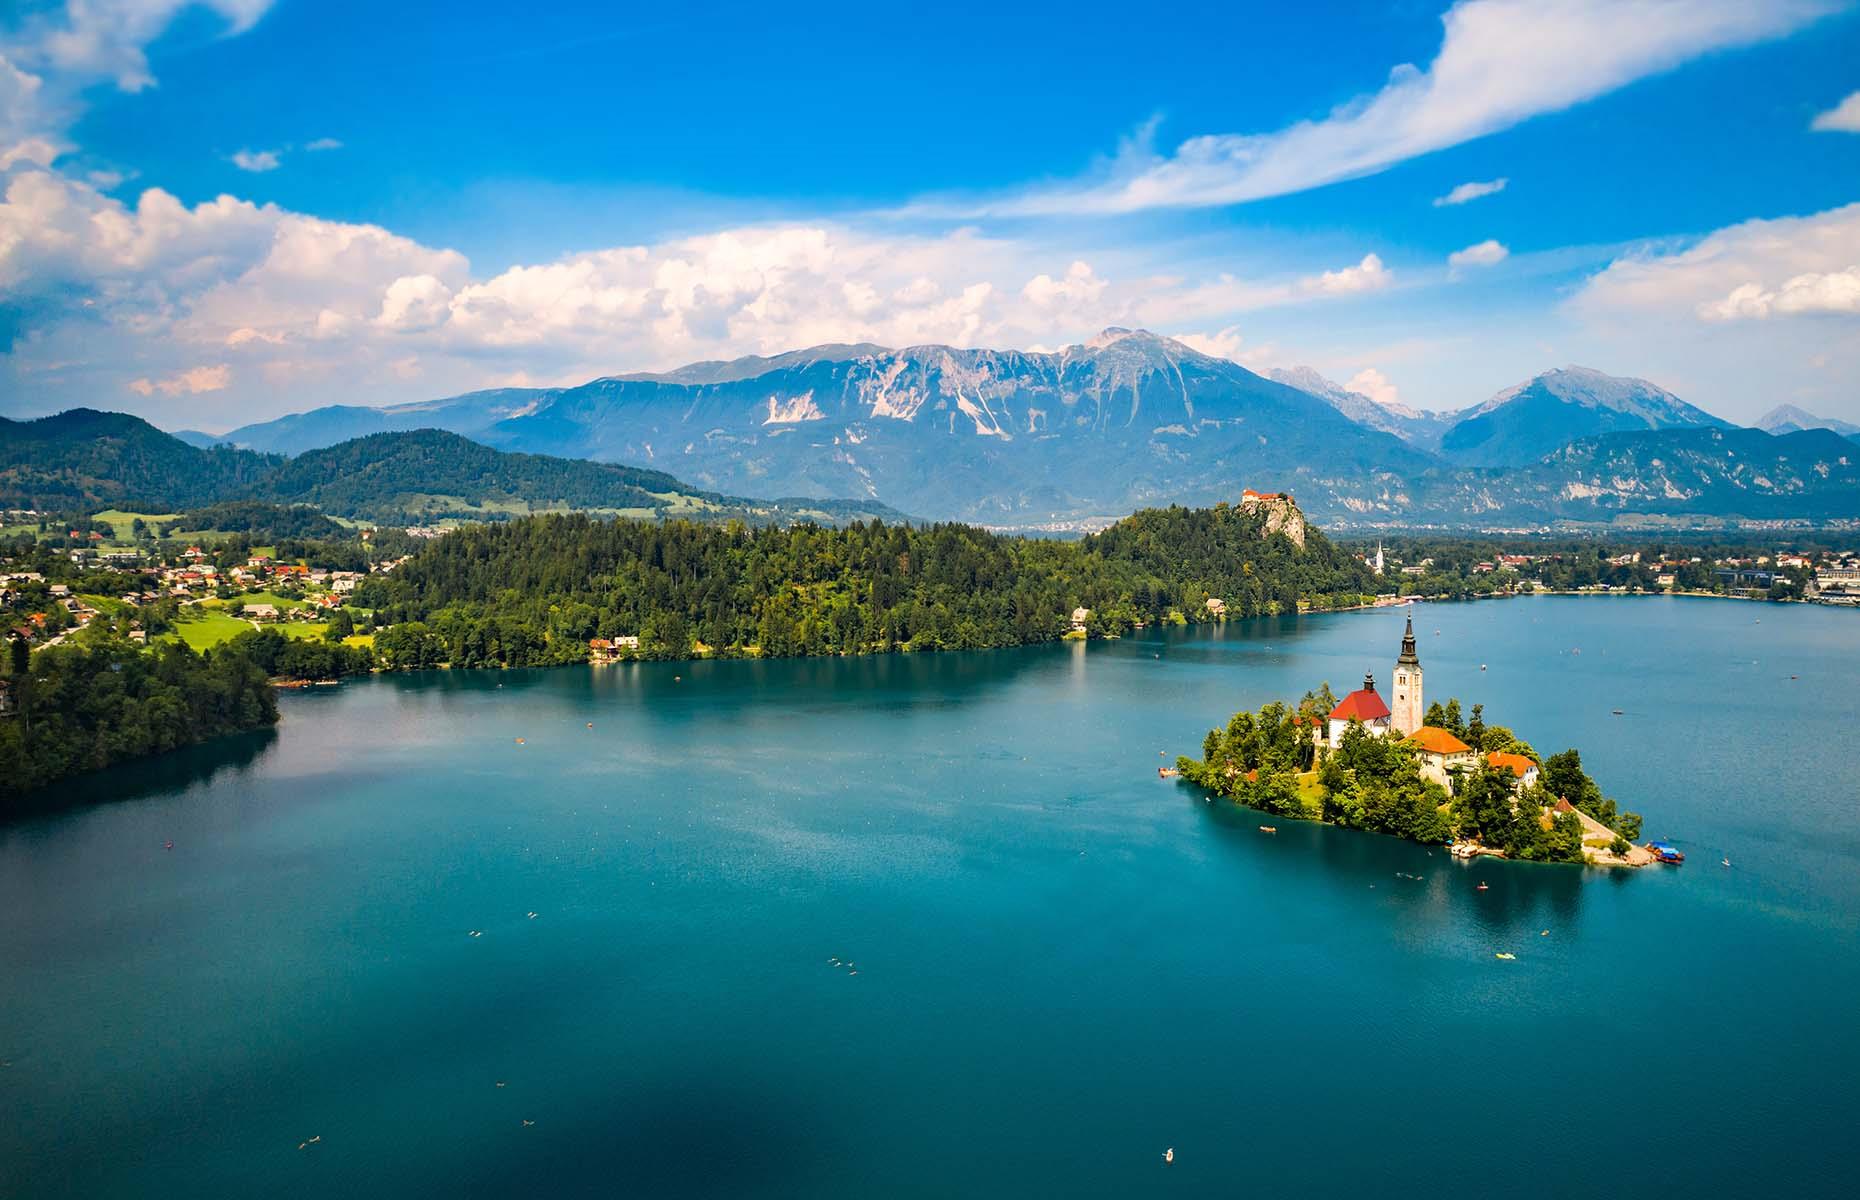 There are so many reasons to visit Slovenia, and Lake Bled, located 34 miles (55km) from the capital city Ljubljana, is certainly one of them. Flanked by the towering Julian Alps and close to Triglav National Park, this emerald-hued expanse is known for its ‘healing’ mineral-rich waters and alpine beauty. In the centre of Lake Bled lies the striking Church of the Mother of God, perched upon Slovenia’s only natural island.